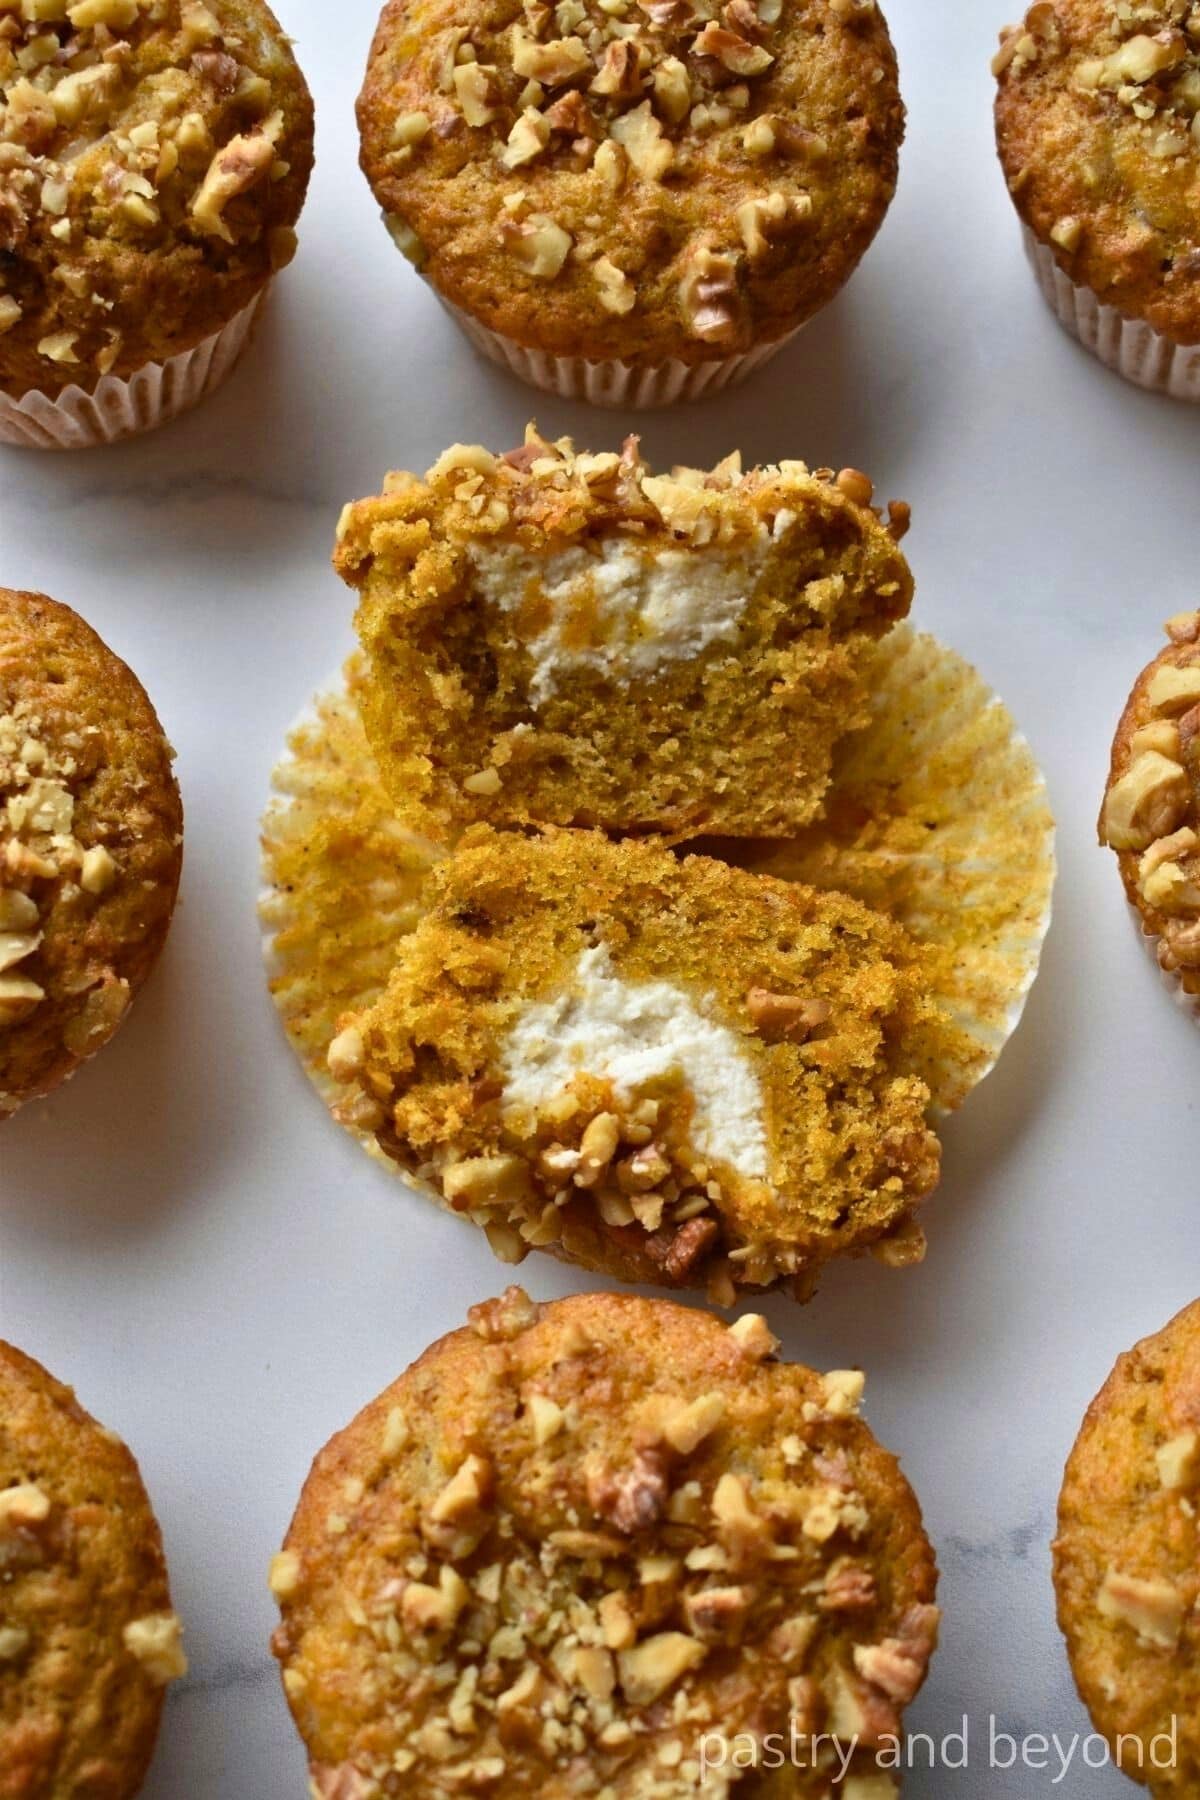 Carrot cake cream cheese filled muffin that is cut in half, in the middle of other muffins.